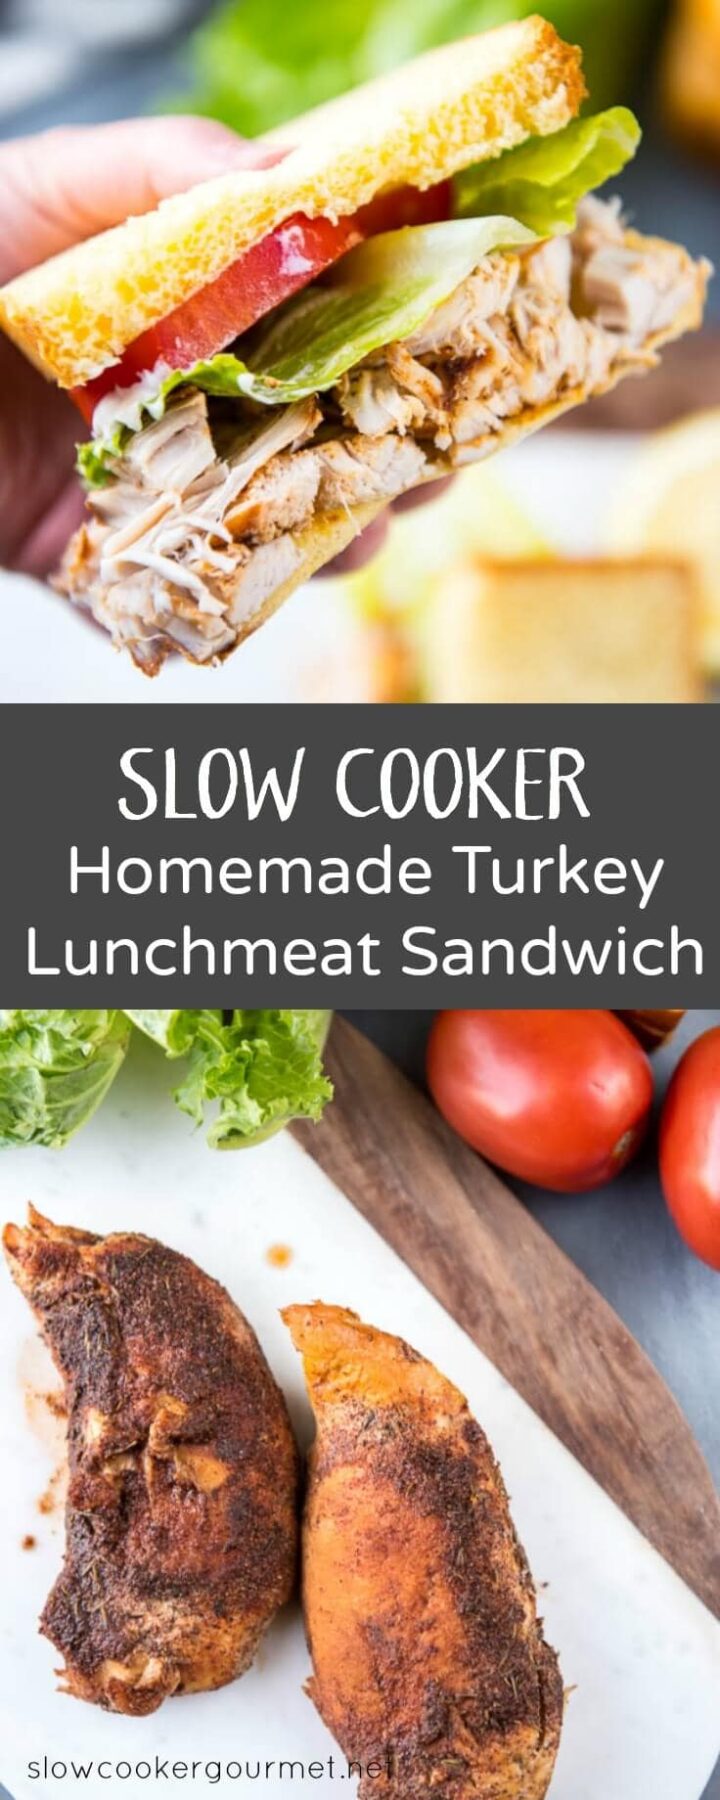 Slow Cooker Memphis Rubbed Turkey Sandwiches are the perfect way to make a simple lunch or dinner. Make ahead and have the most delicious sandwiches ever and be the envy of the office or lunchroom!